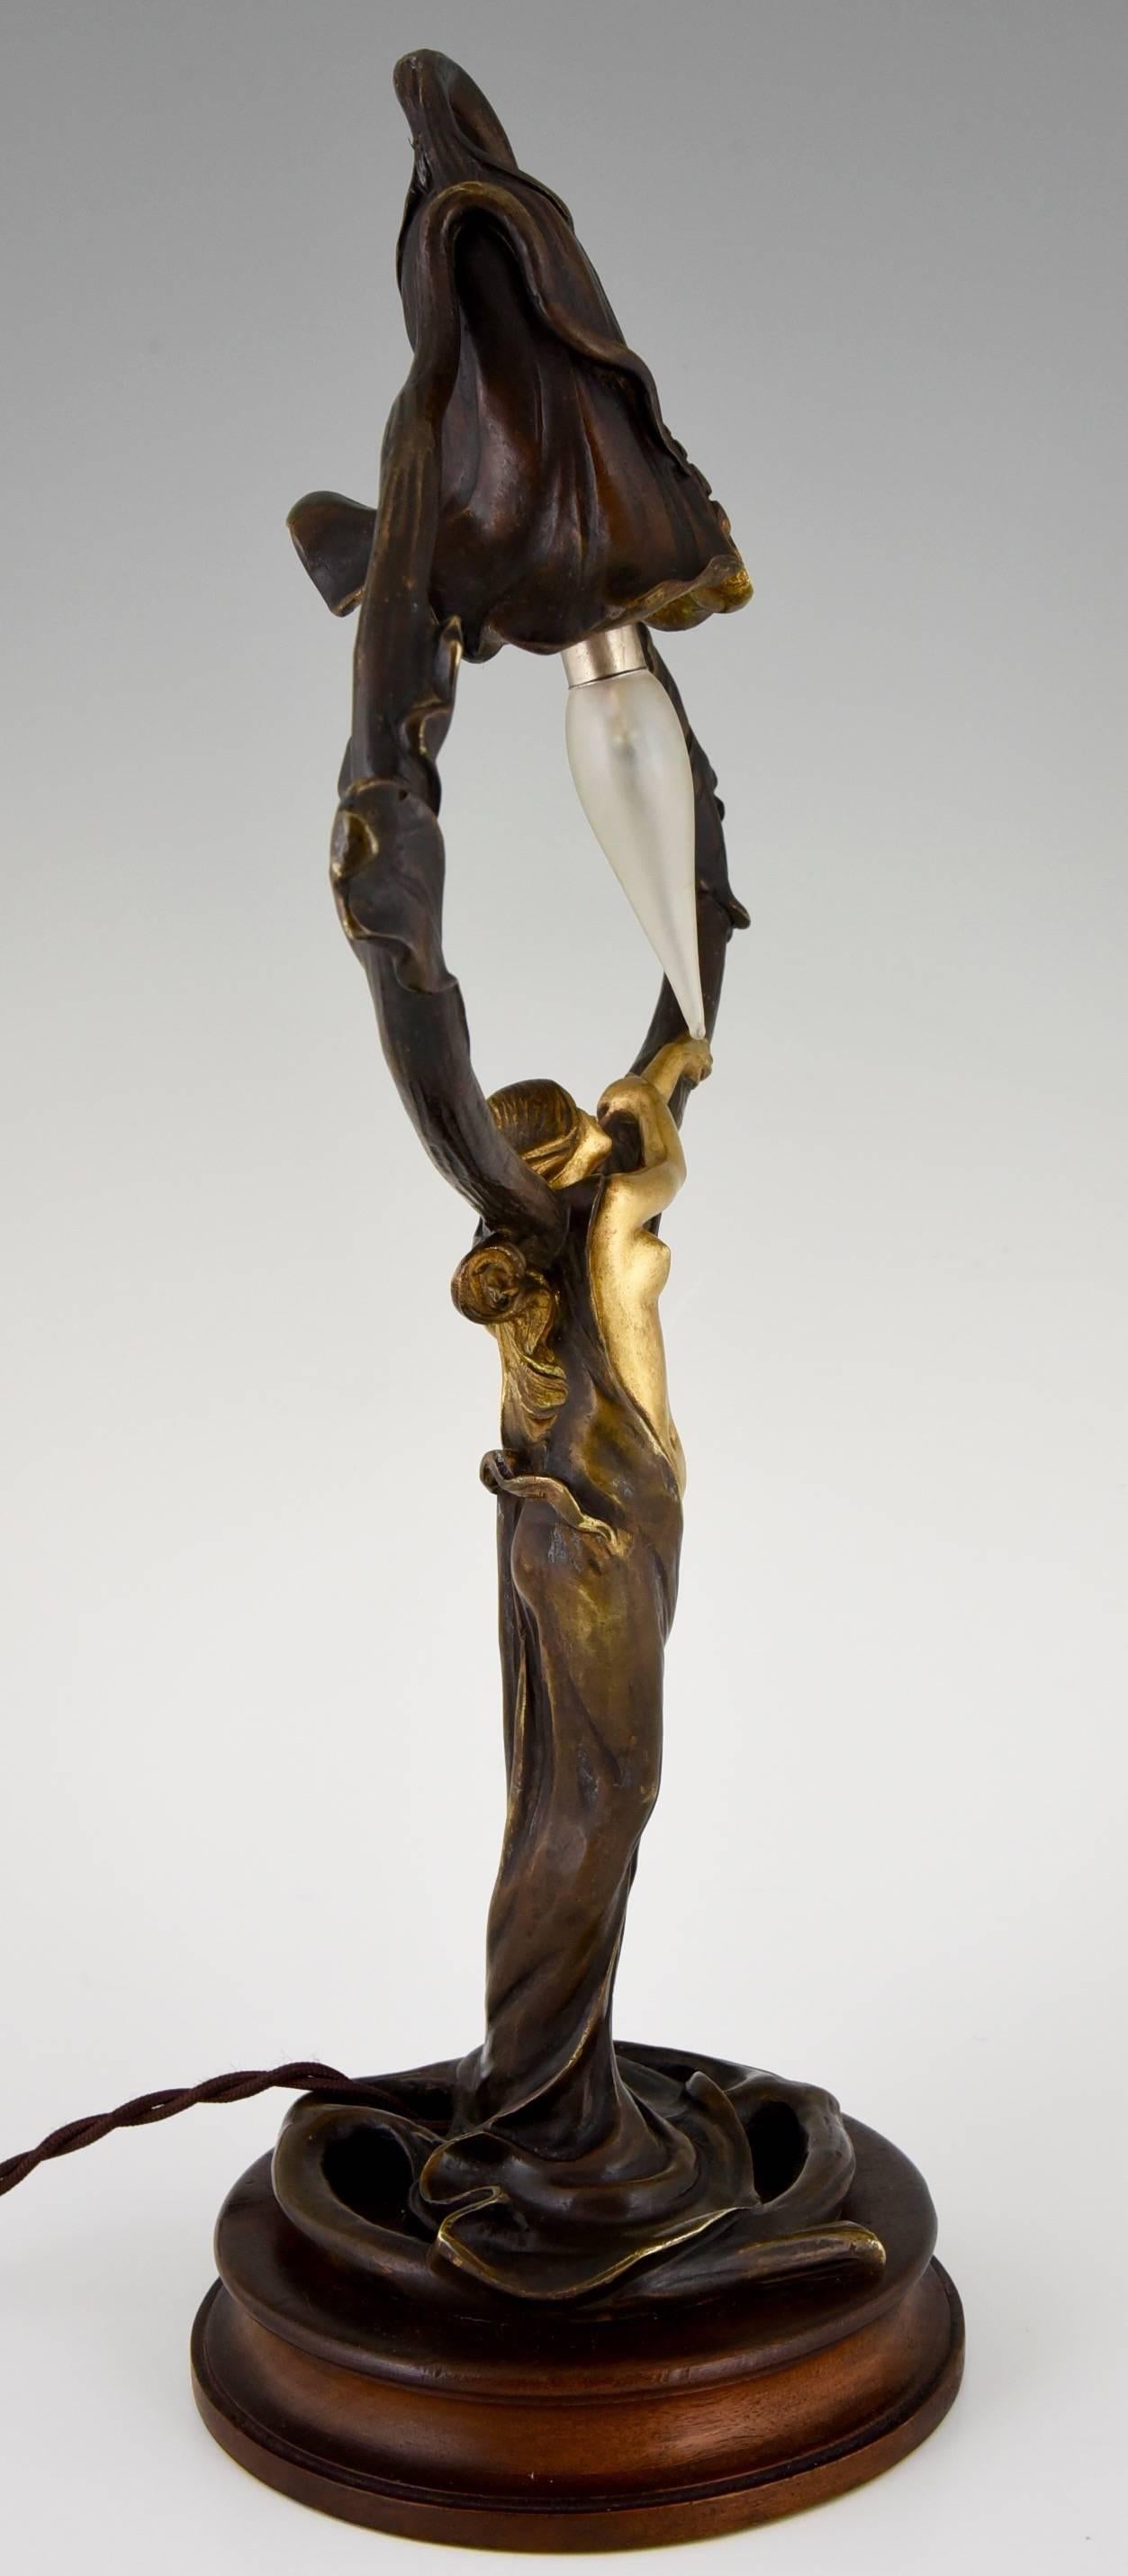 Patinated French Art Nouveau Bronze Table Lamp by Jonchery with Nude, 1900